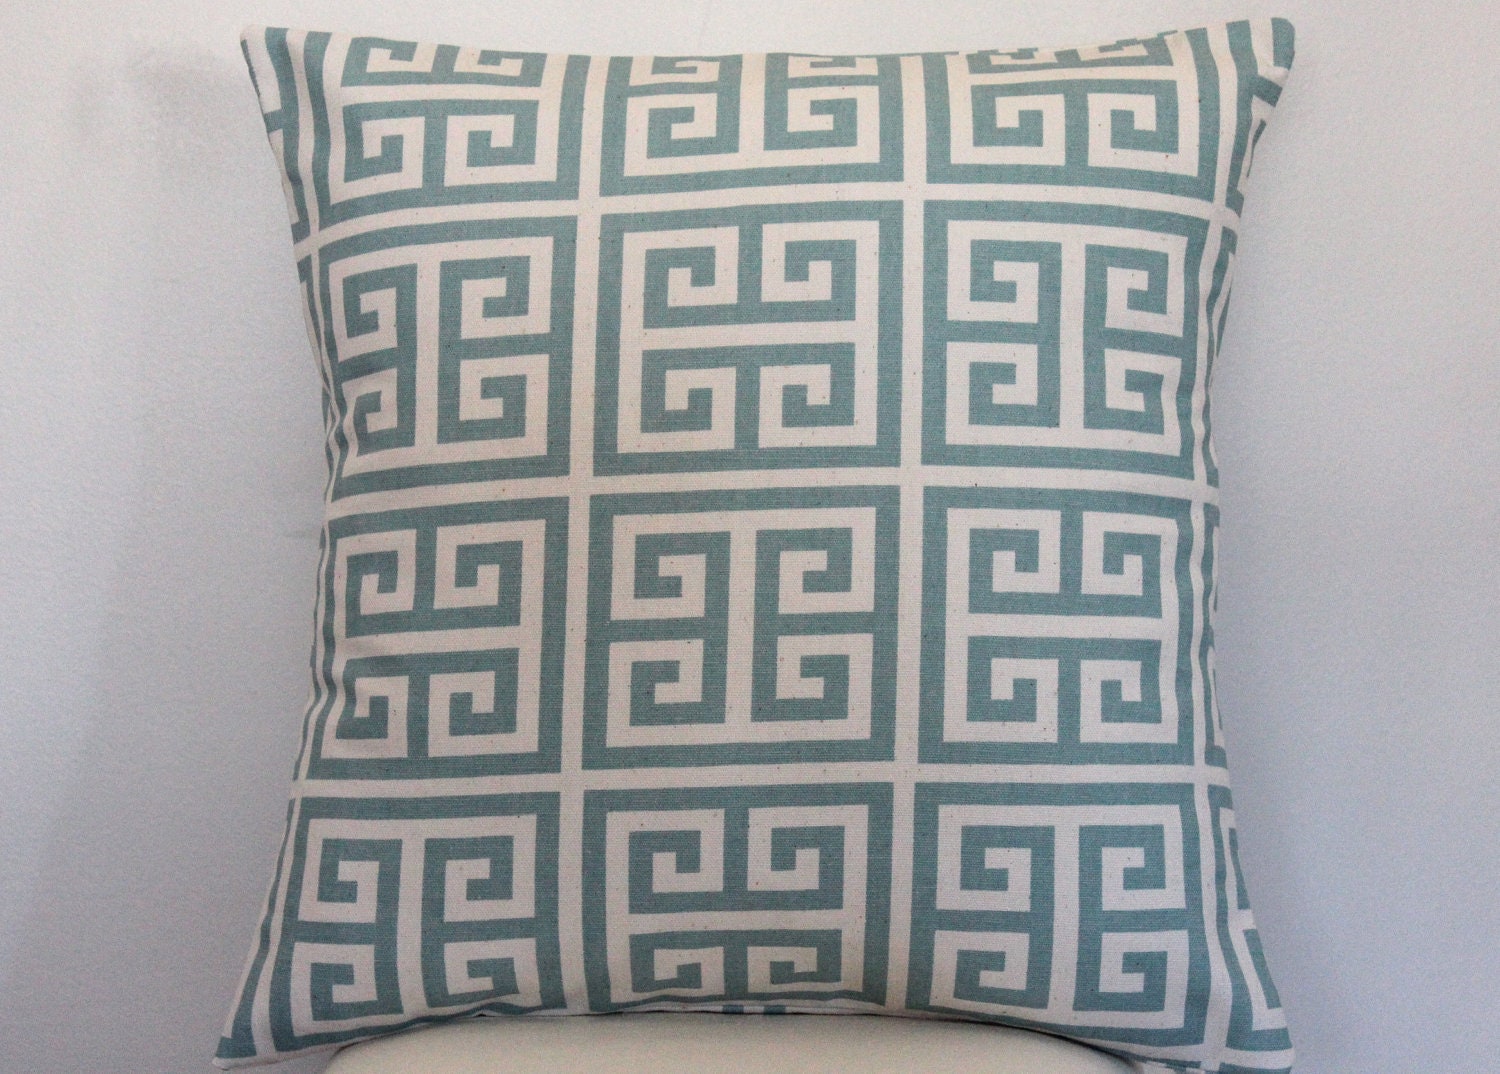 Pillow Decorative Throw Pillow Covers Accent Pillows Cushion Covers 16 x 16 inches Blue on Natural Greek Key